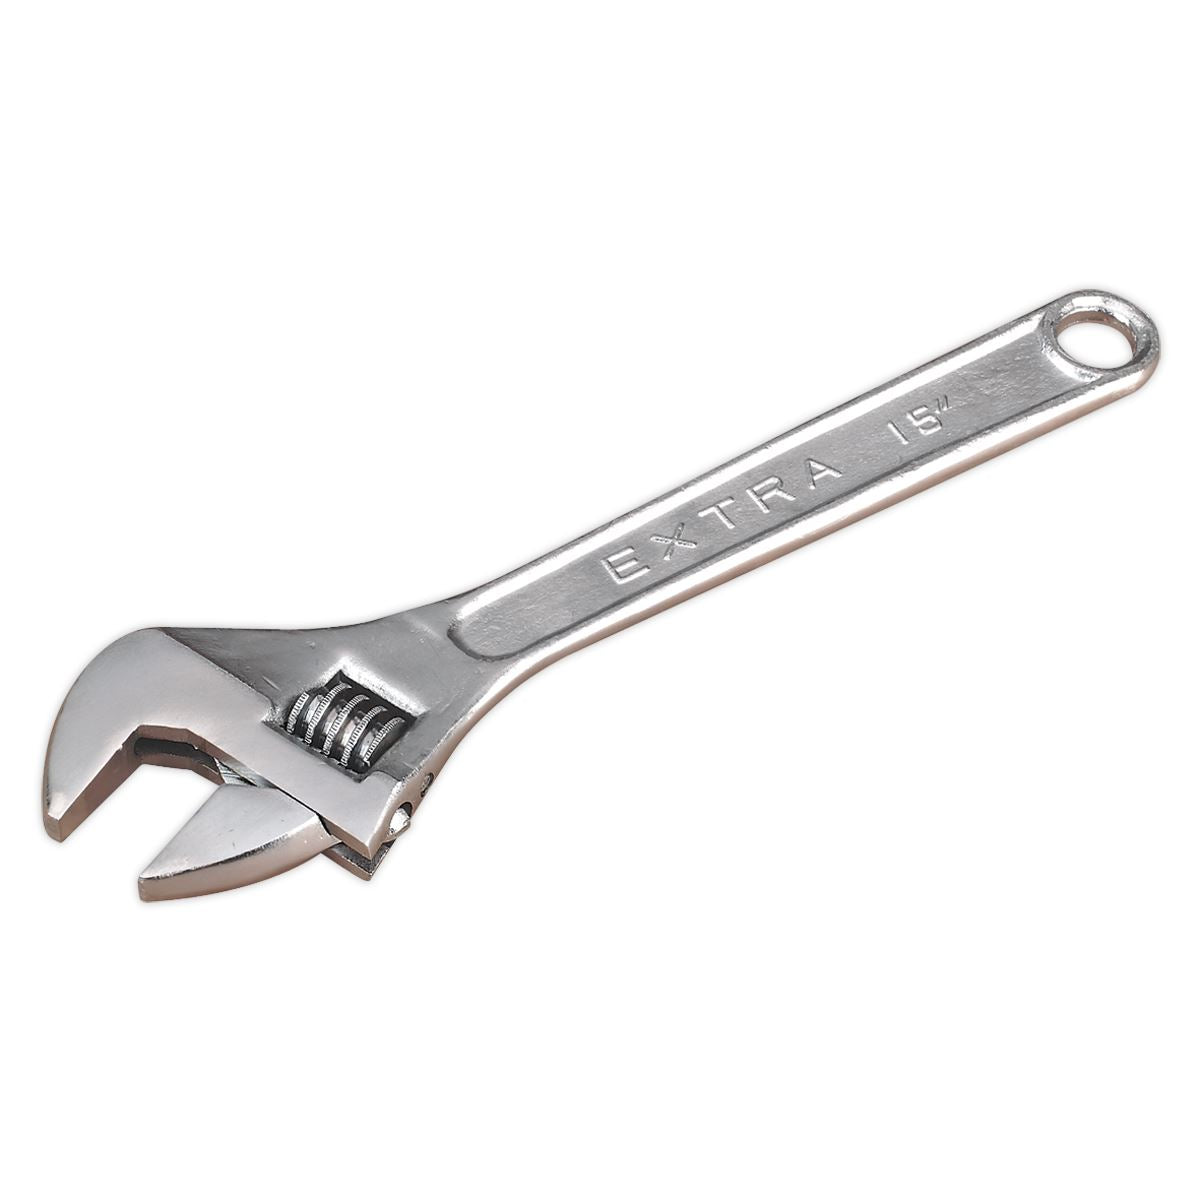 Siegen by Sealey Adjustable Wrench 375mm